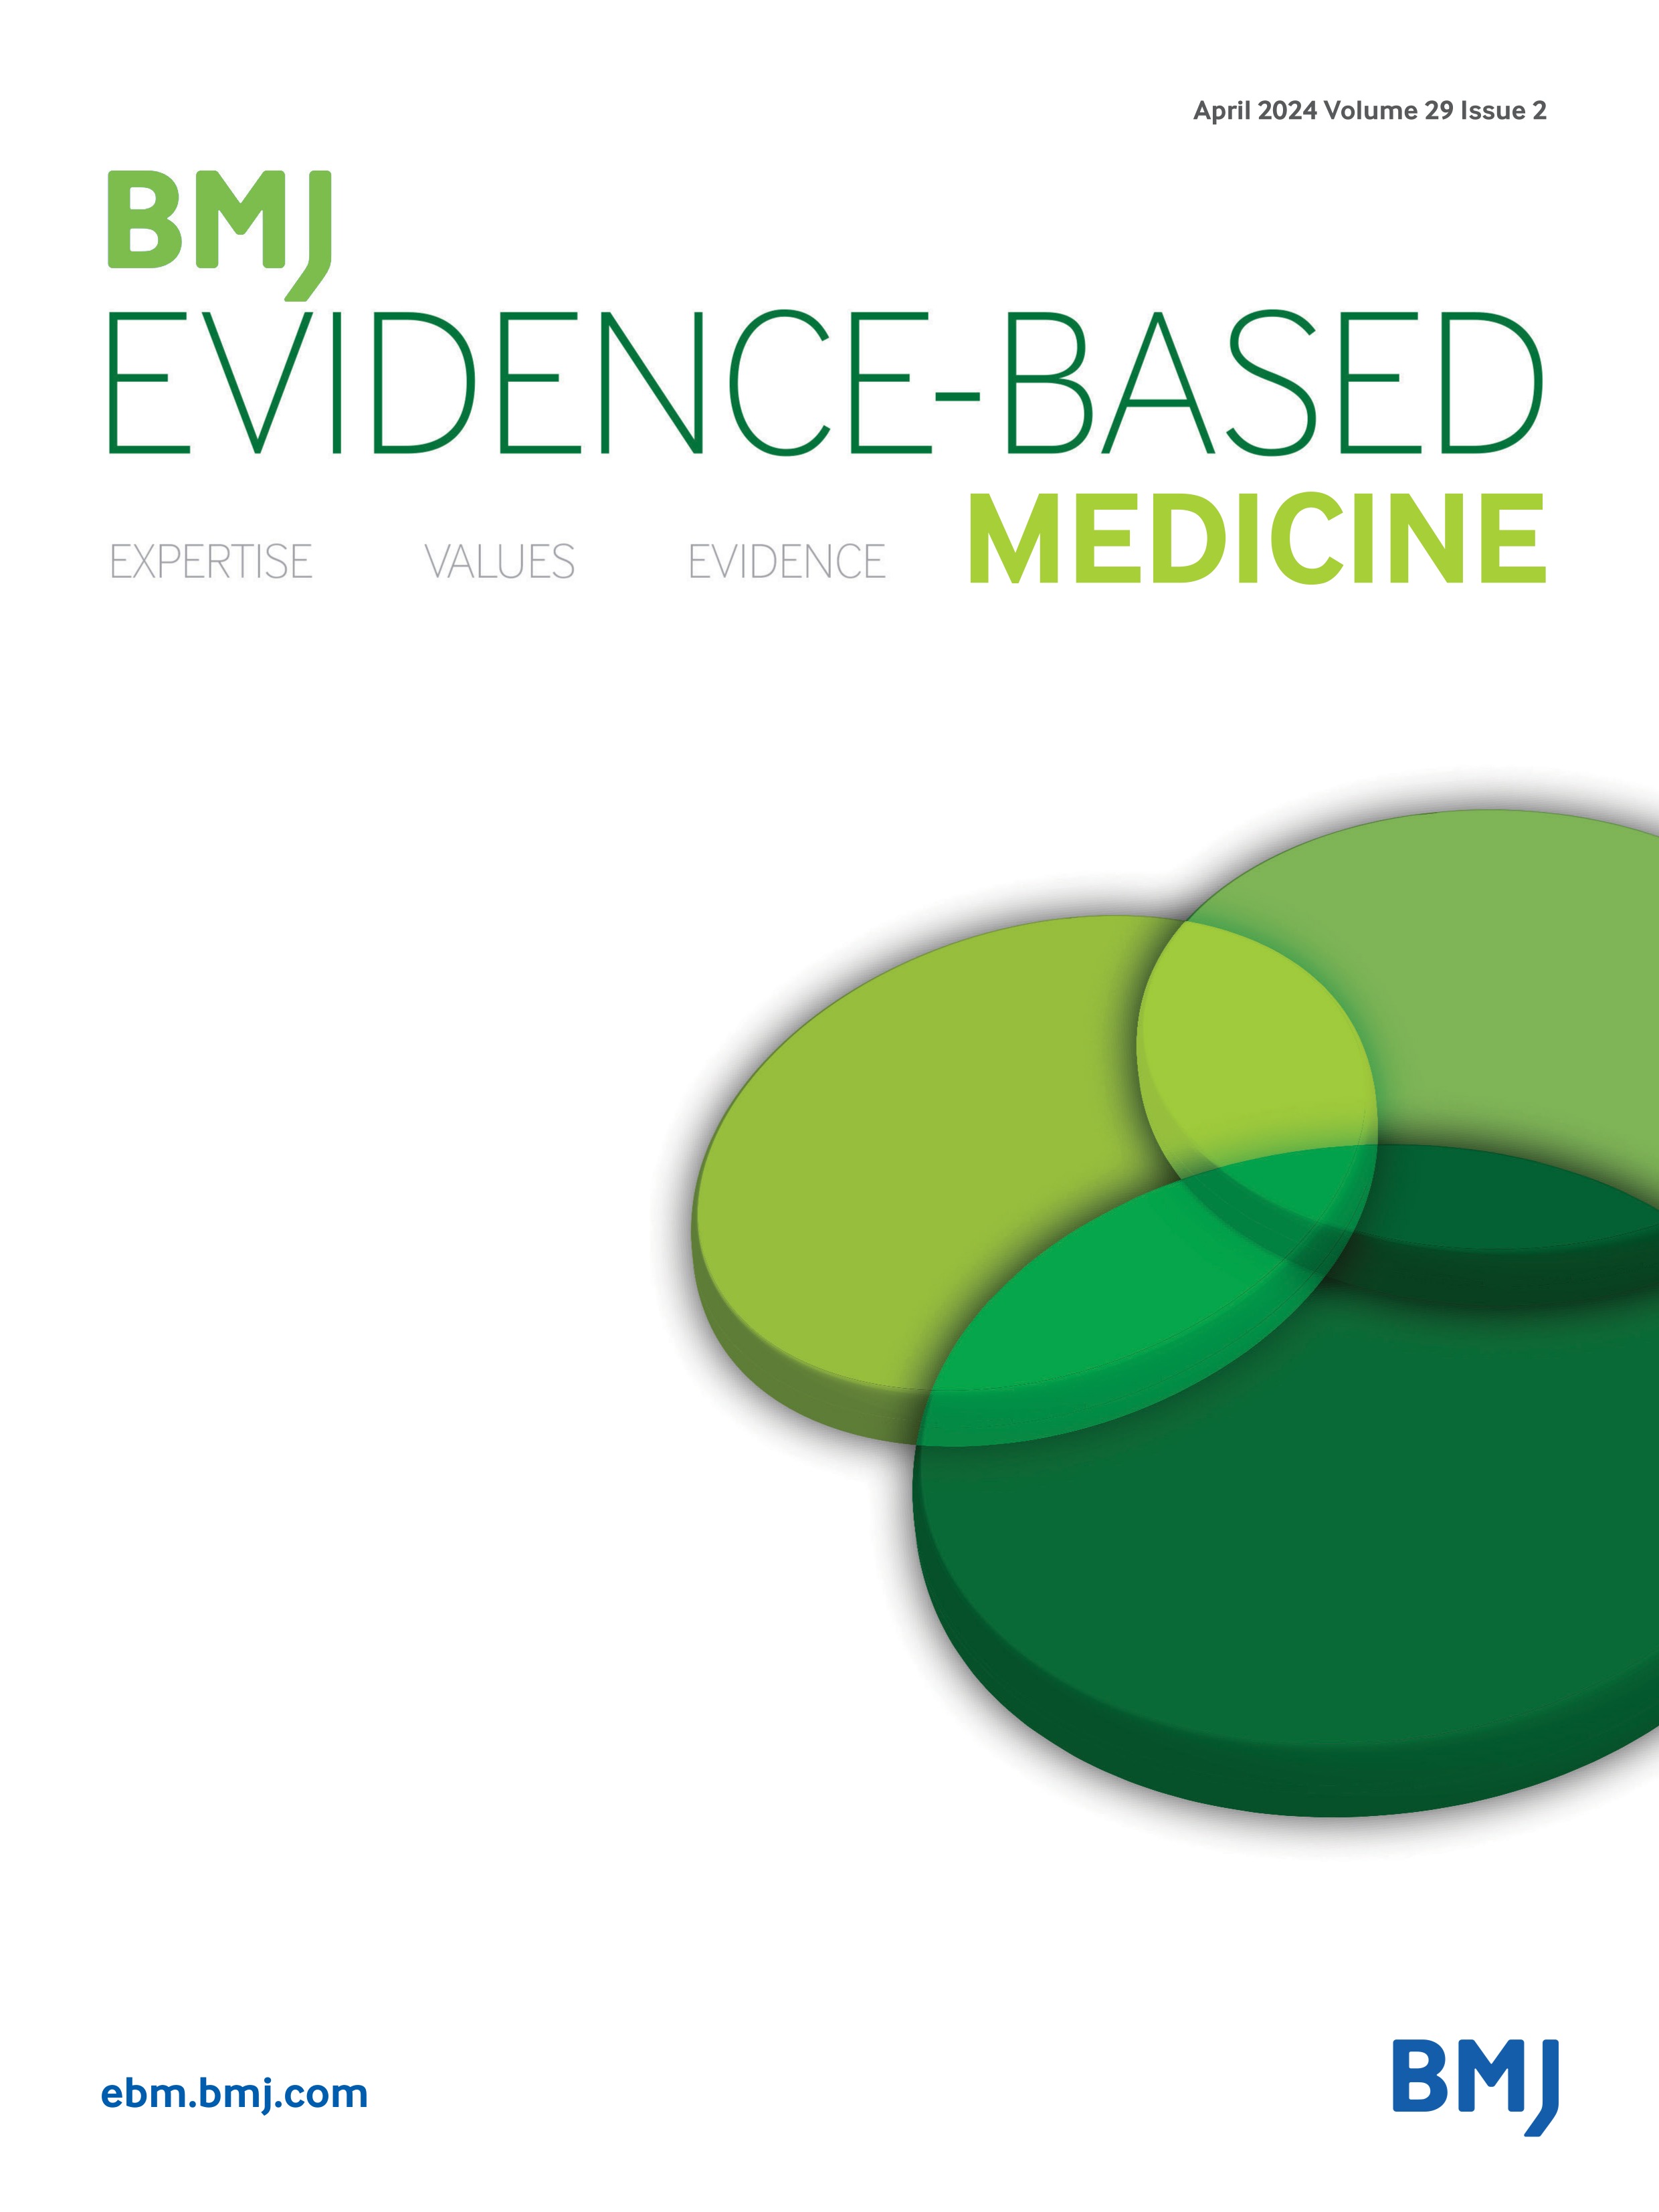 Visualisation of evidence for shared decision making